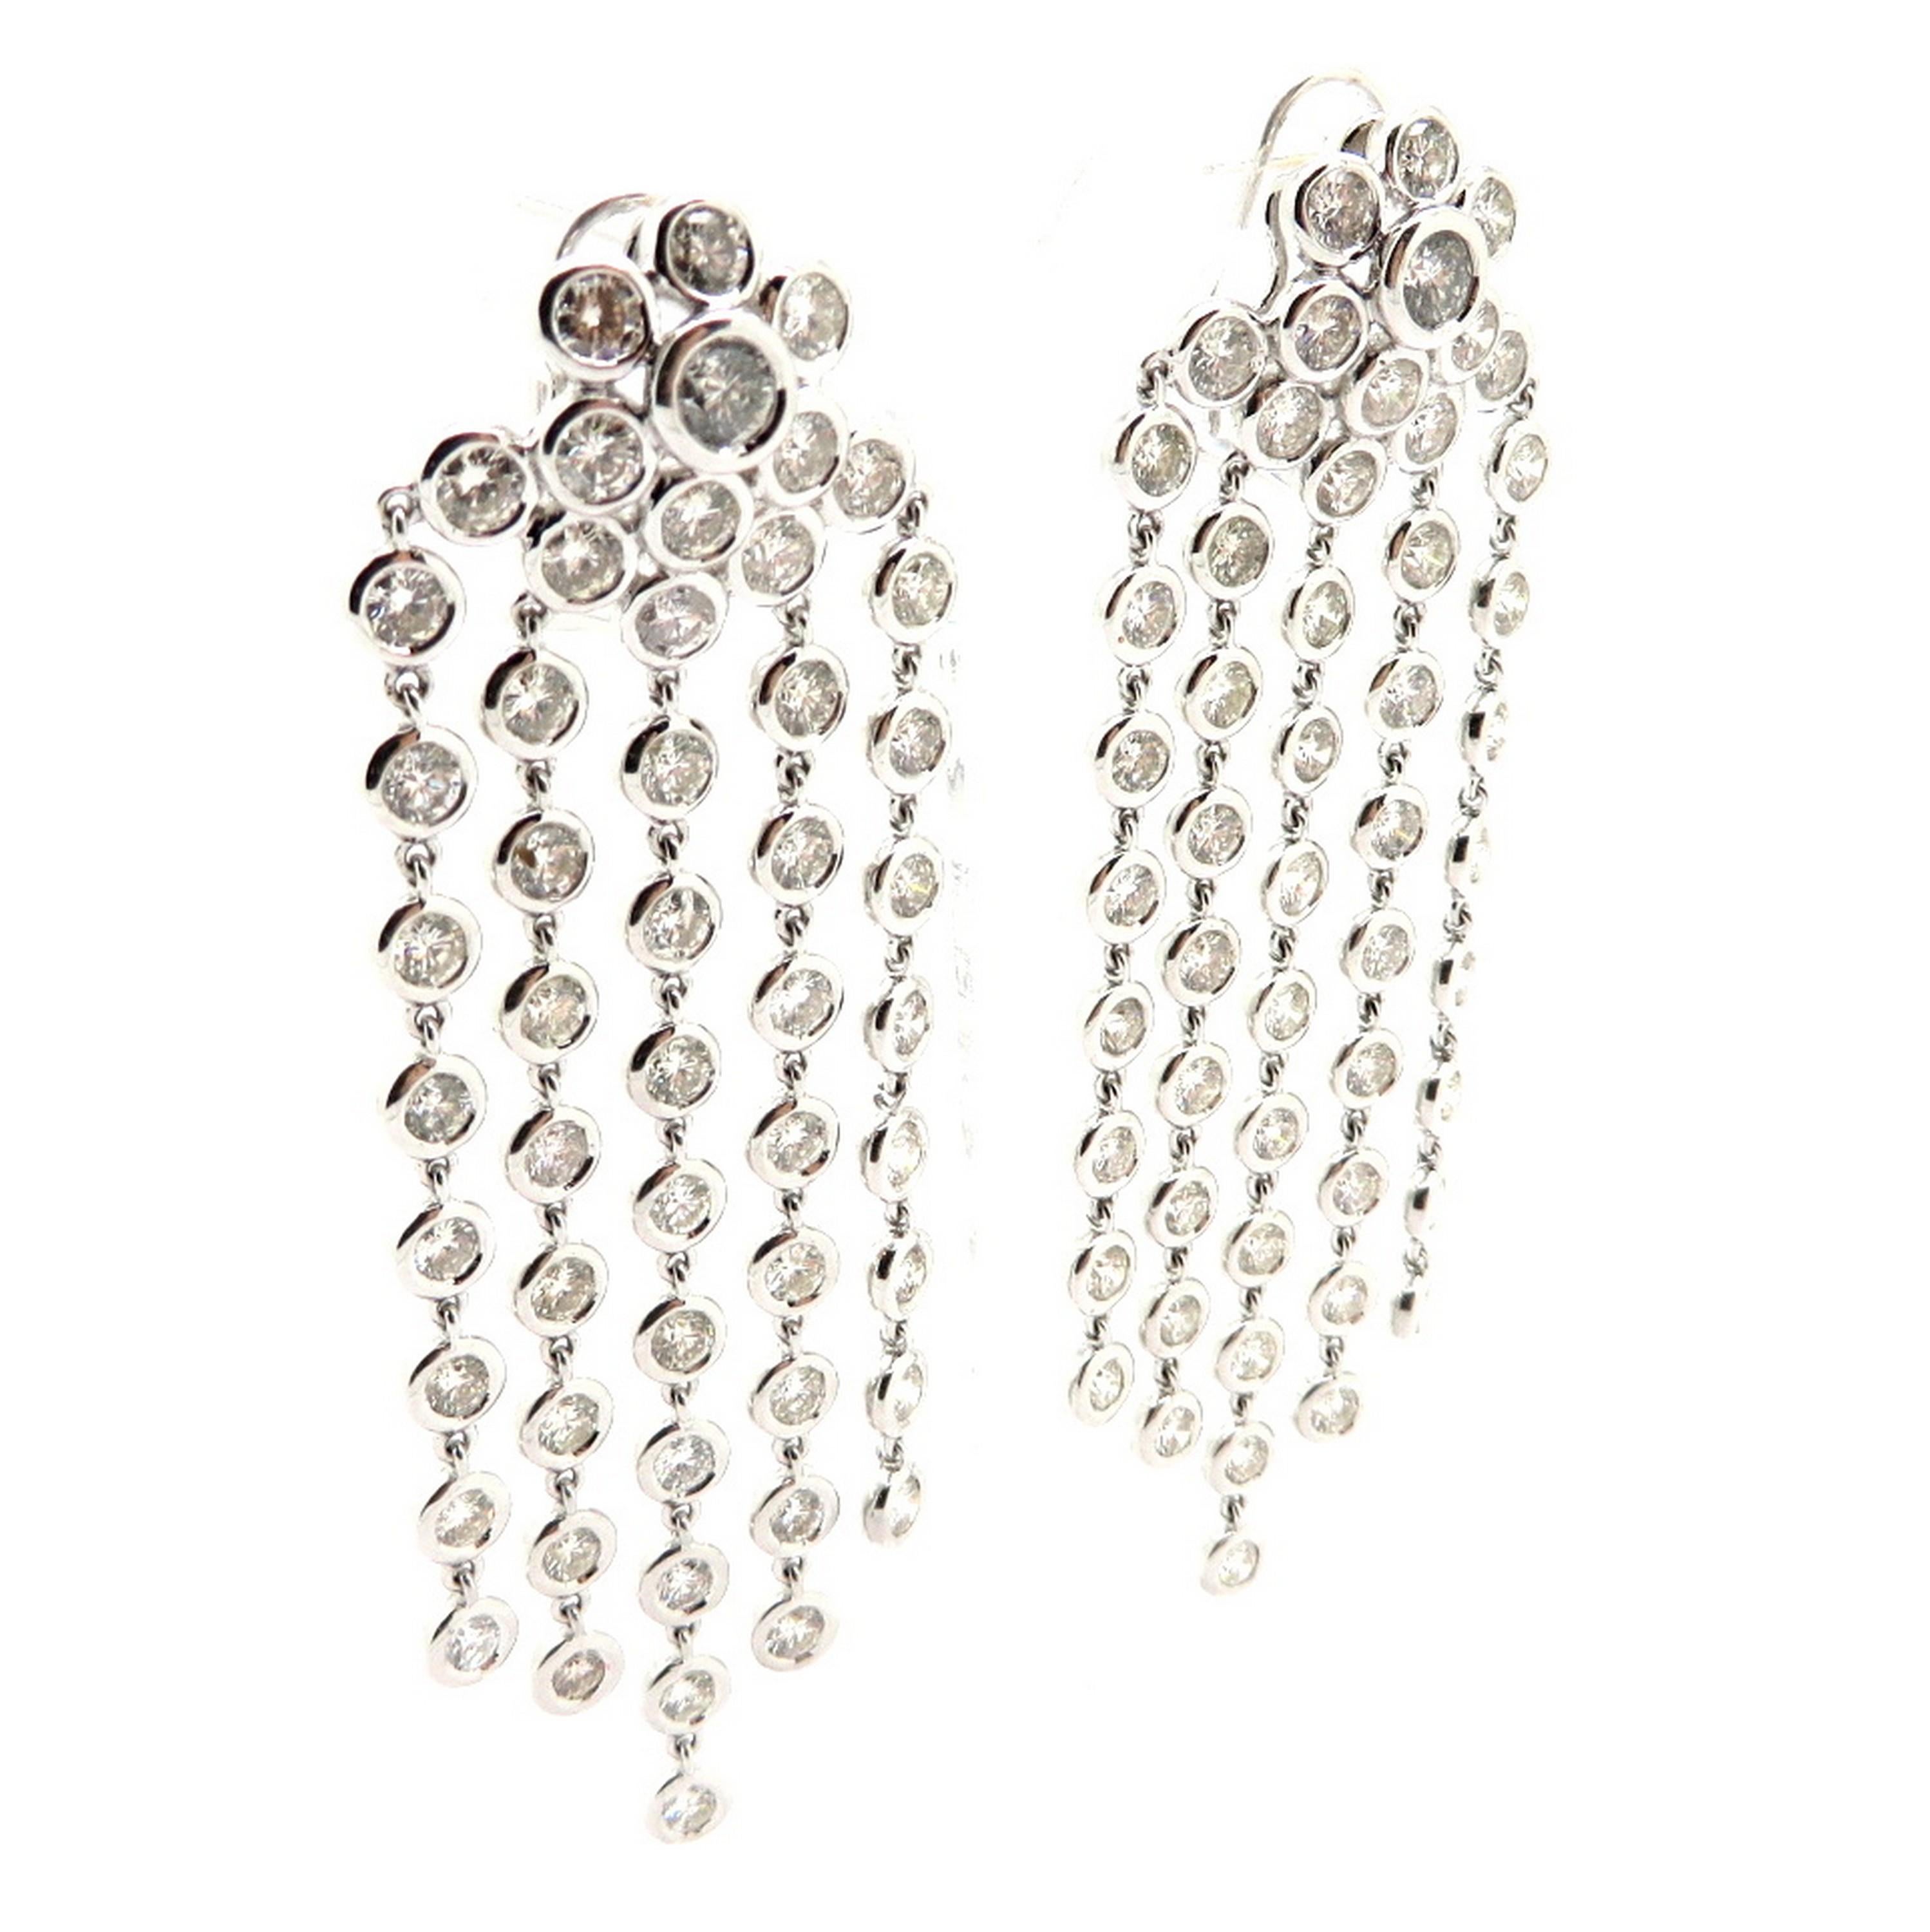 Estate 18K white gold floral chandelier round diamond dangle earrings. Showcasing 104 bezel set round brilliant cut diamonds weighing a combined total of approximately 16.00 carats. Diamond grading: color grade: G – H. Clarity grade: SI1 – SI2. The